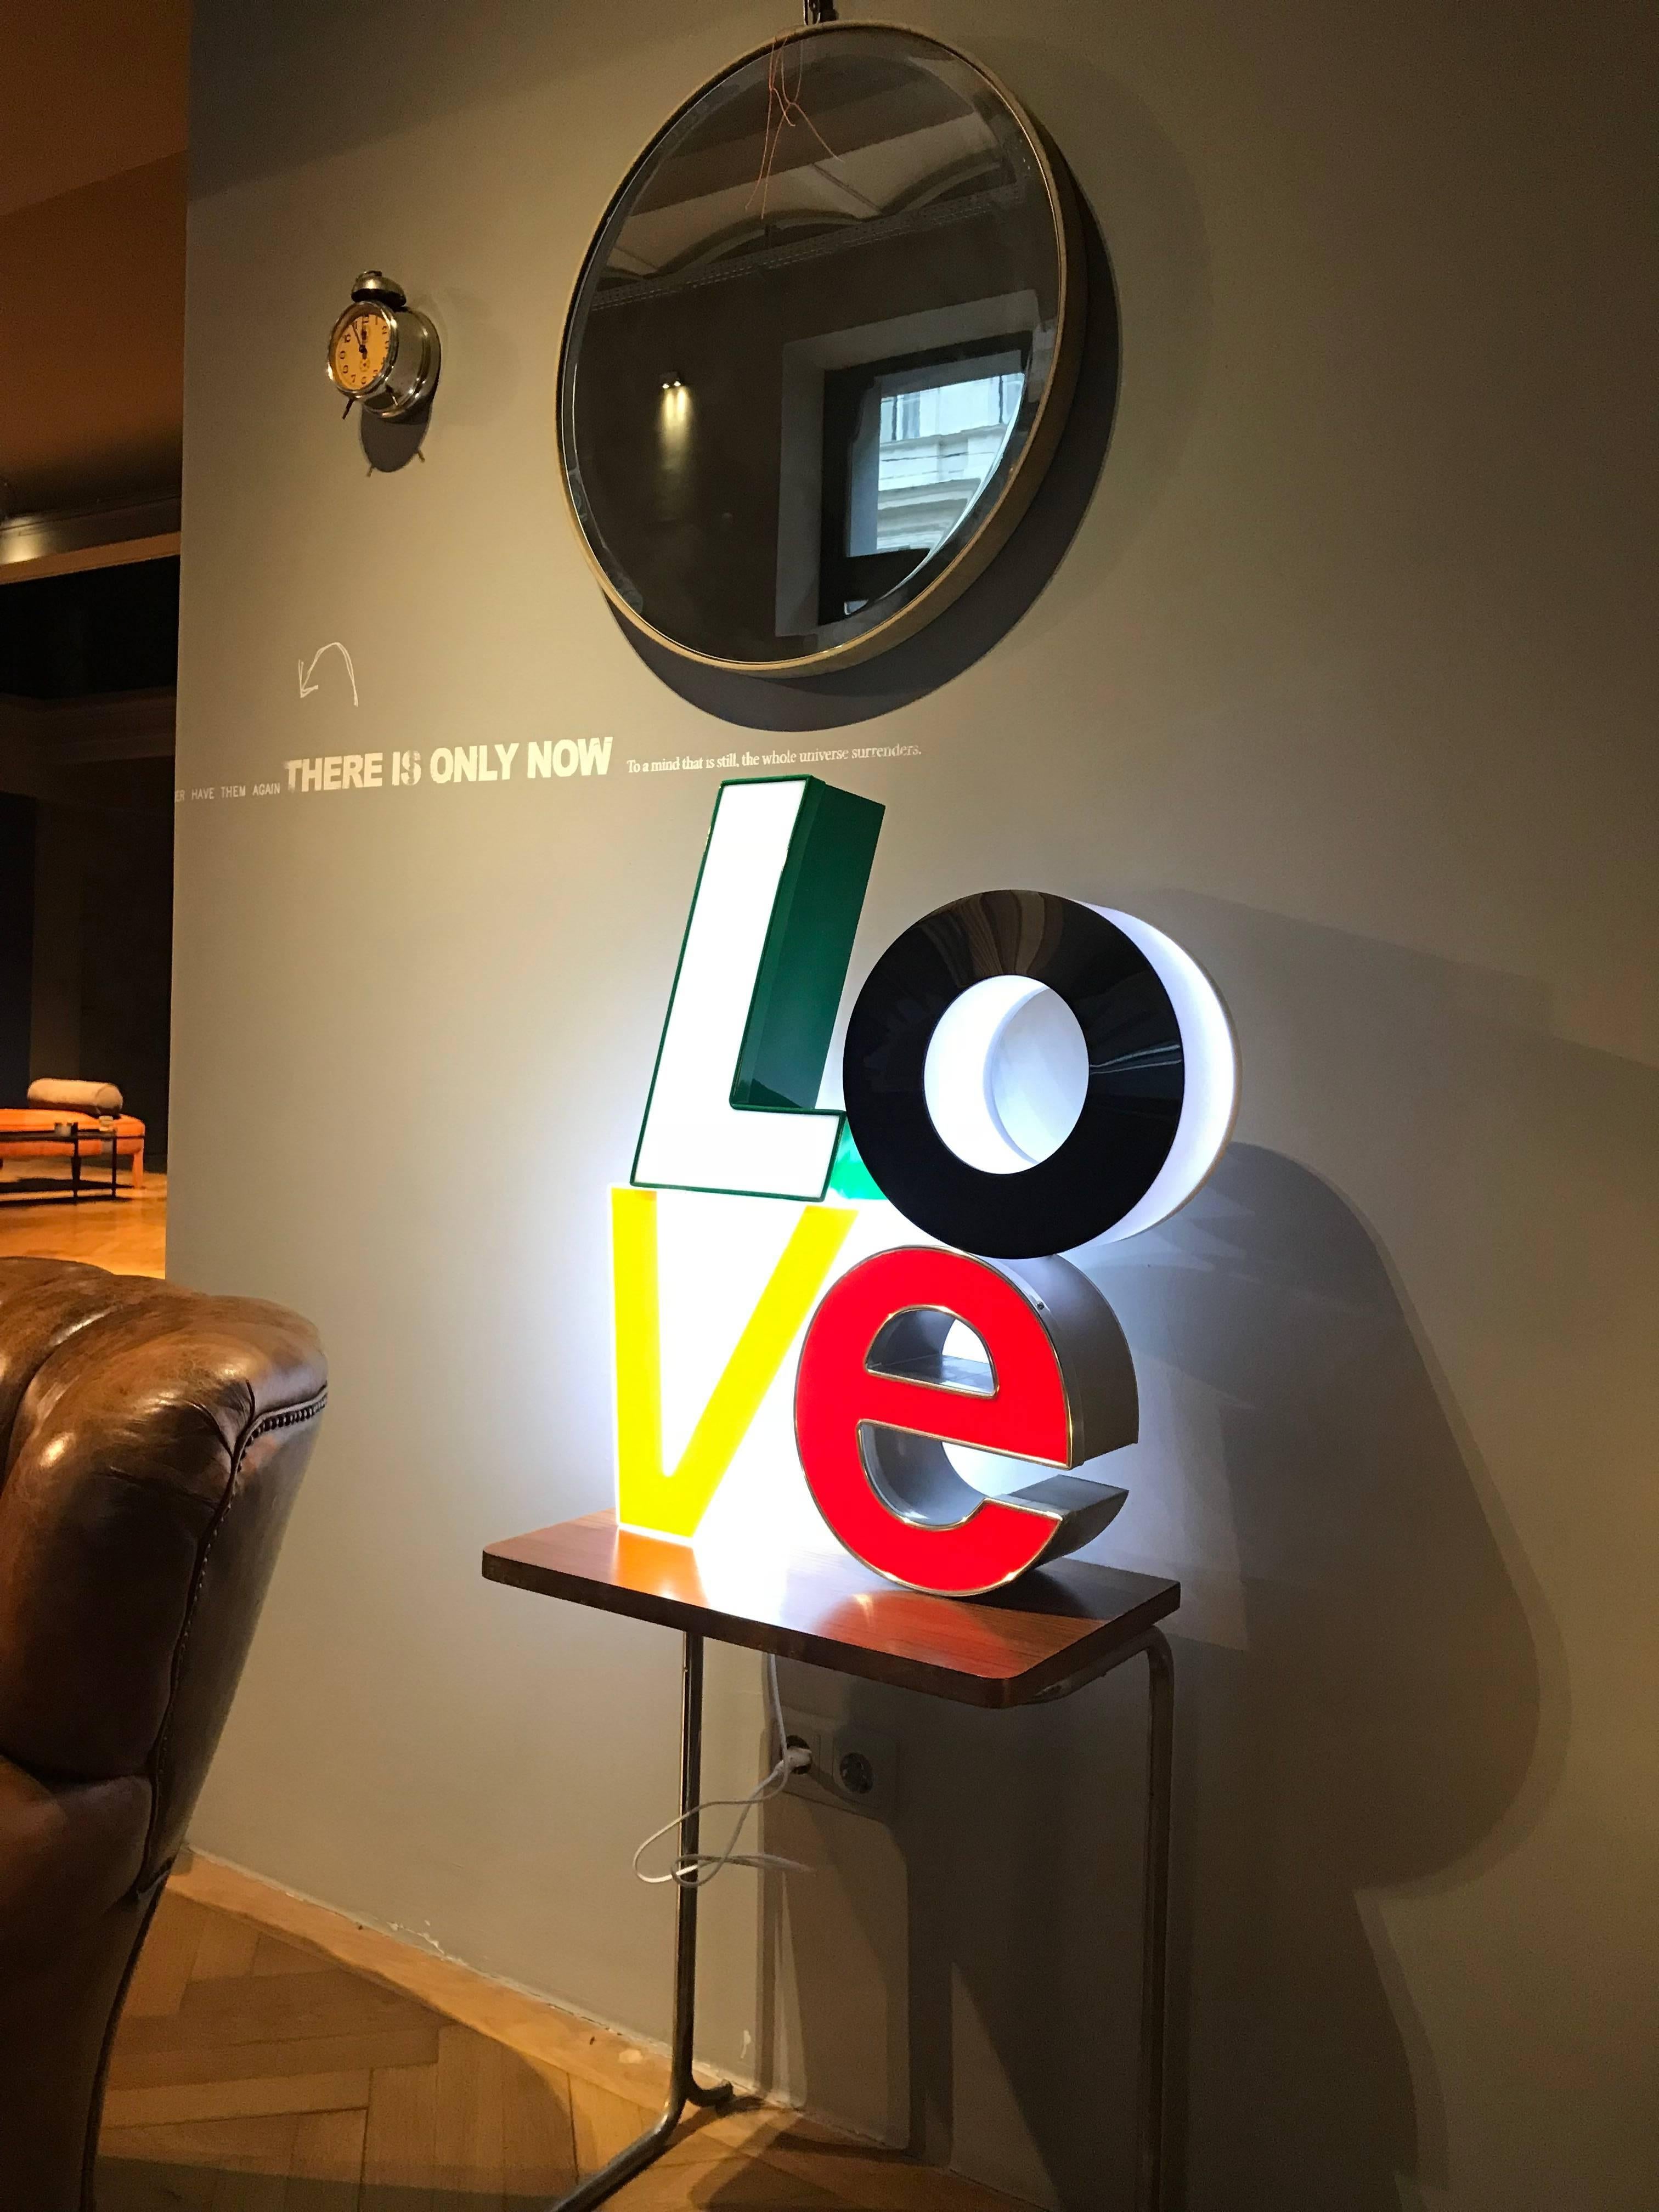 German 3D LOVE Lighting Sign in Style of Robert Indiana, Arty Letter Sculpture